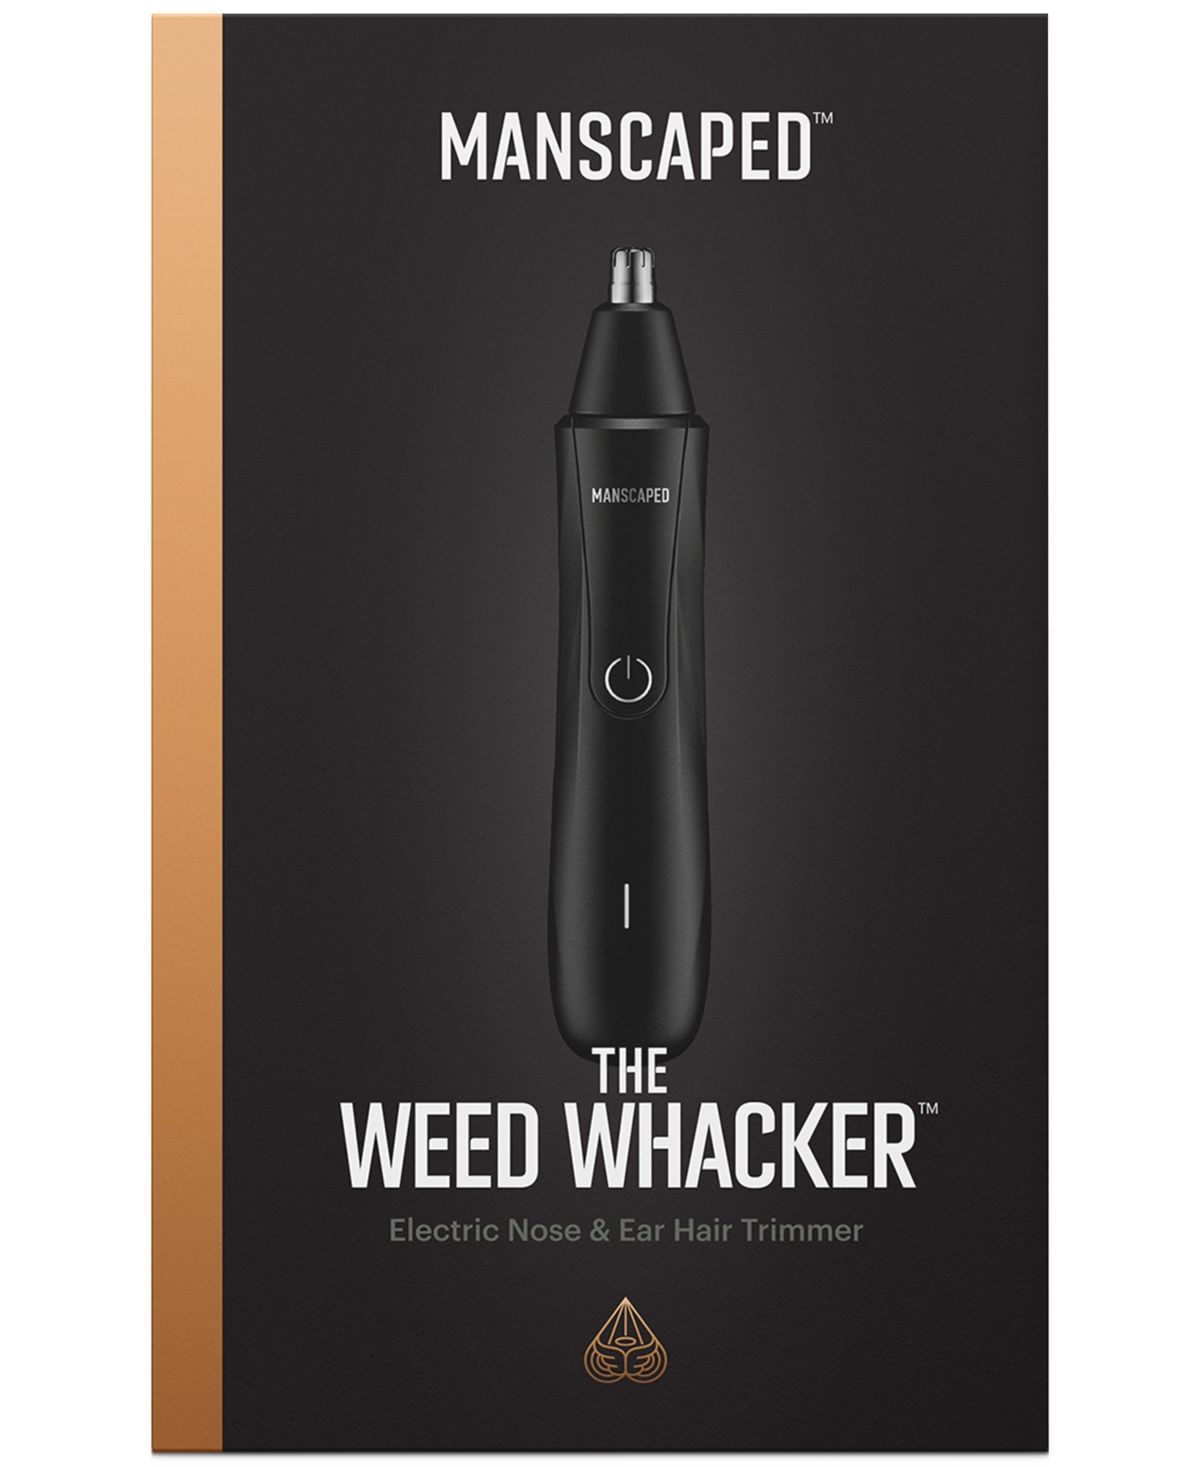 Manscaped Weed Whacker Nose and Ear Hair Trimmer | Macys (US)